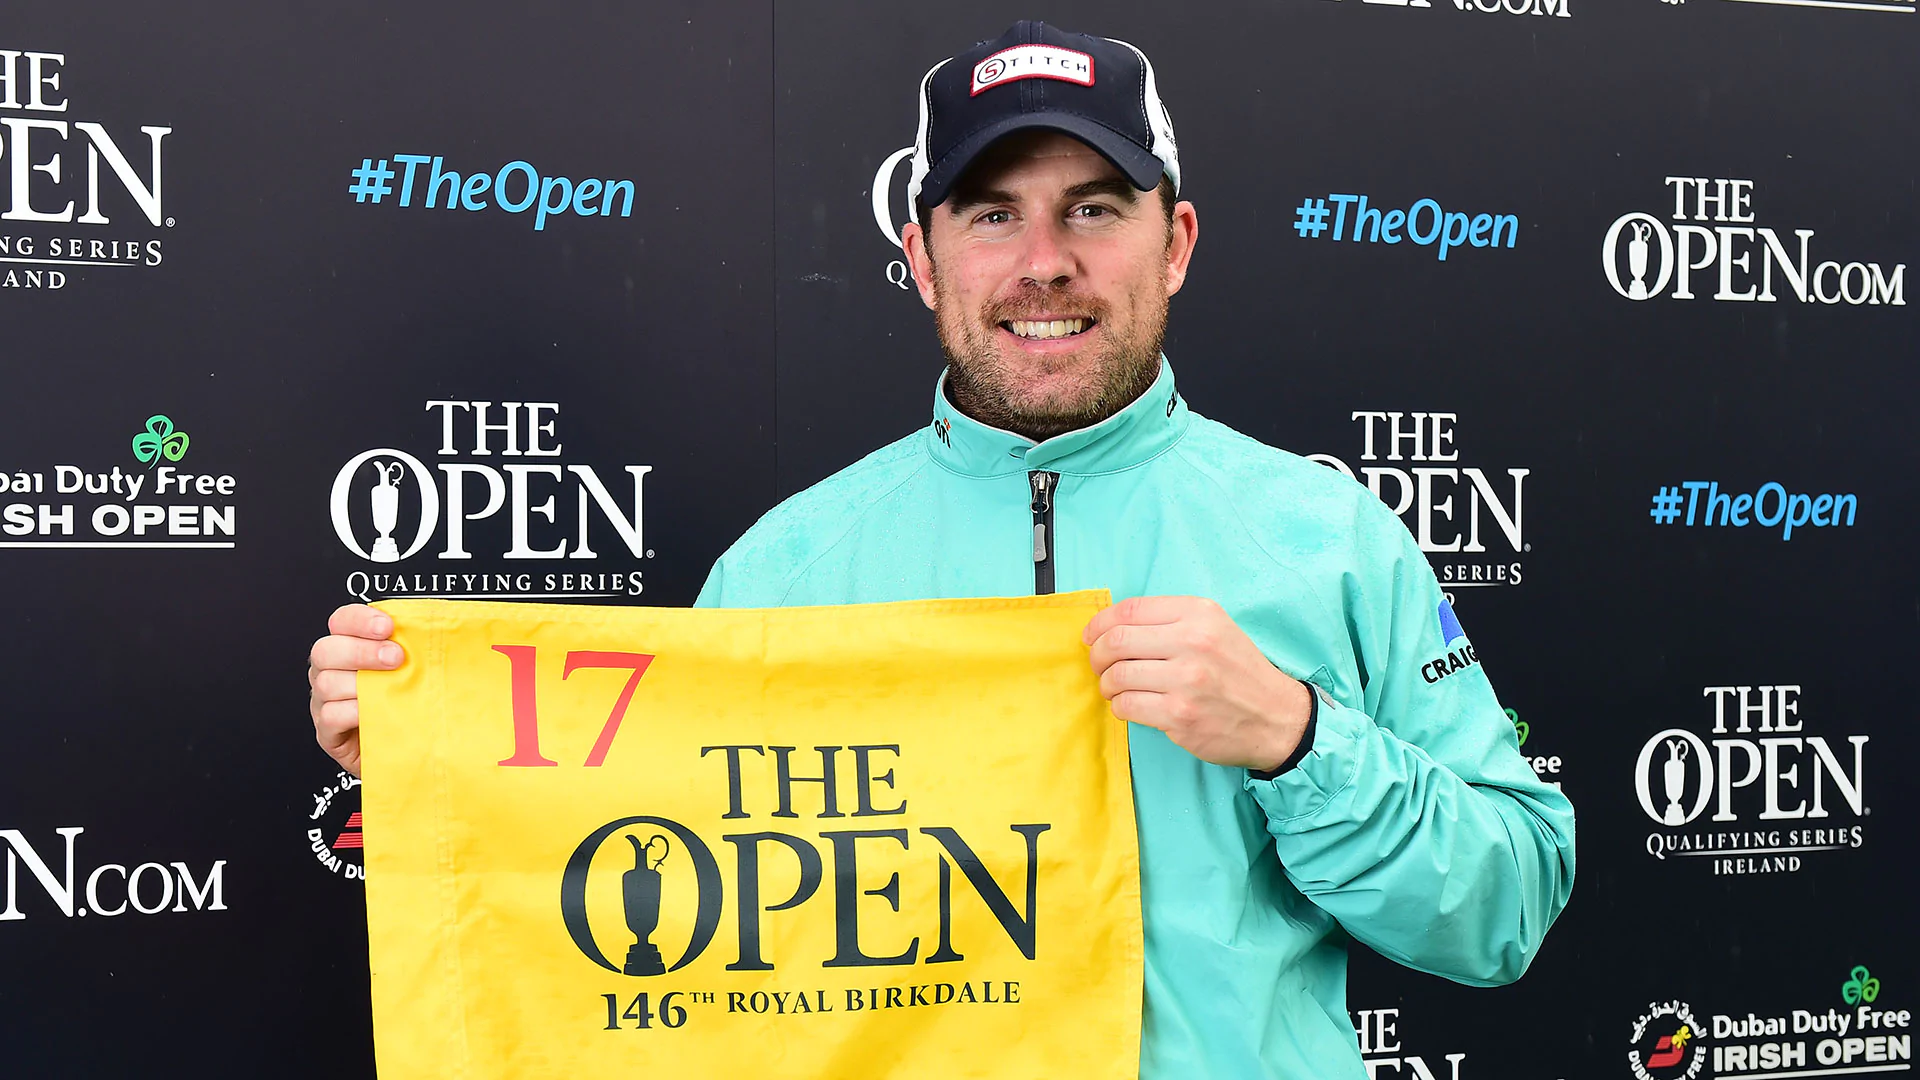 Ramsay, Drysdale, Fox qualify for The Open